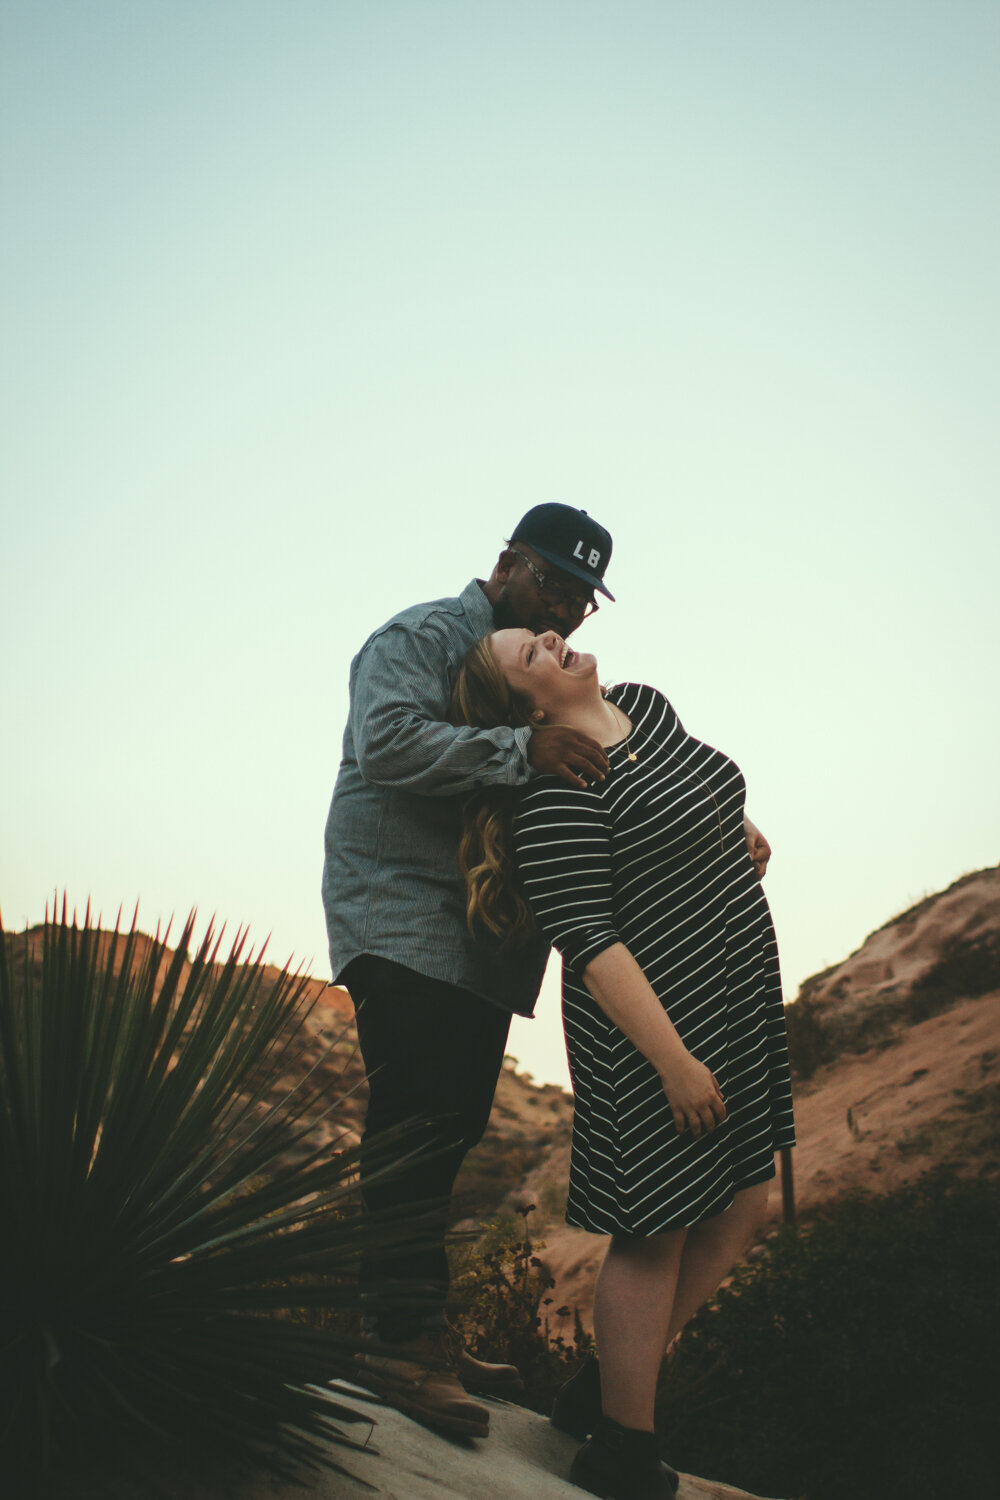 engagement engaged photography photographe marriage wedding photographer corse corsica california desert foothill ranch whiting lifestyle Anza Creative-29.jpg